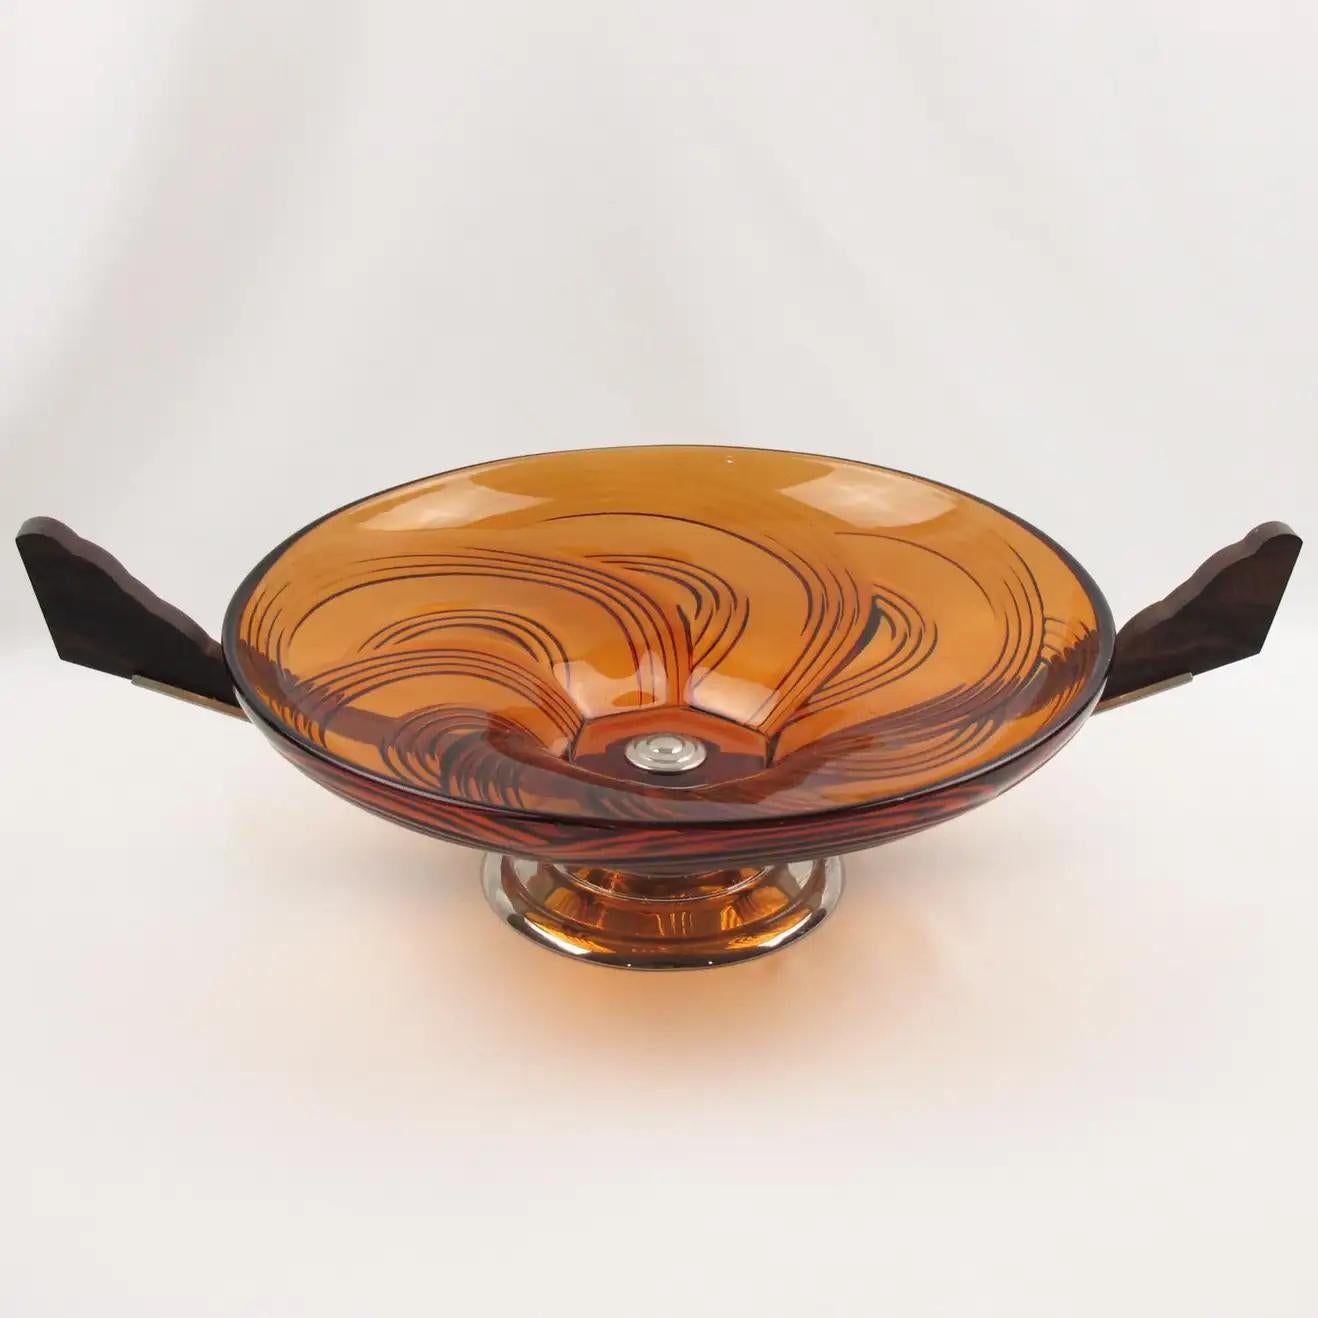 French Art Deco Macassar Wood and Glass Centerpiece Bowl, France 1930s For Sale